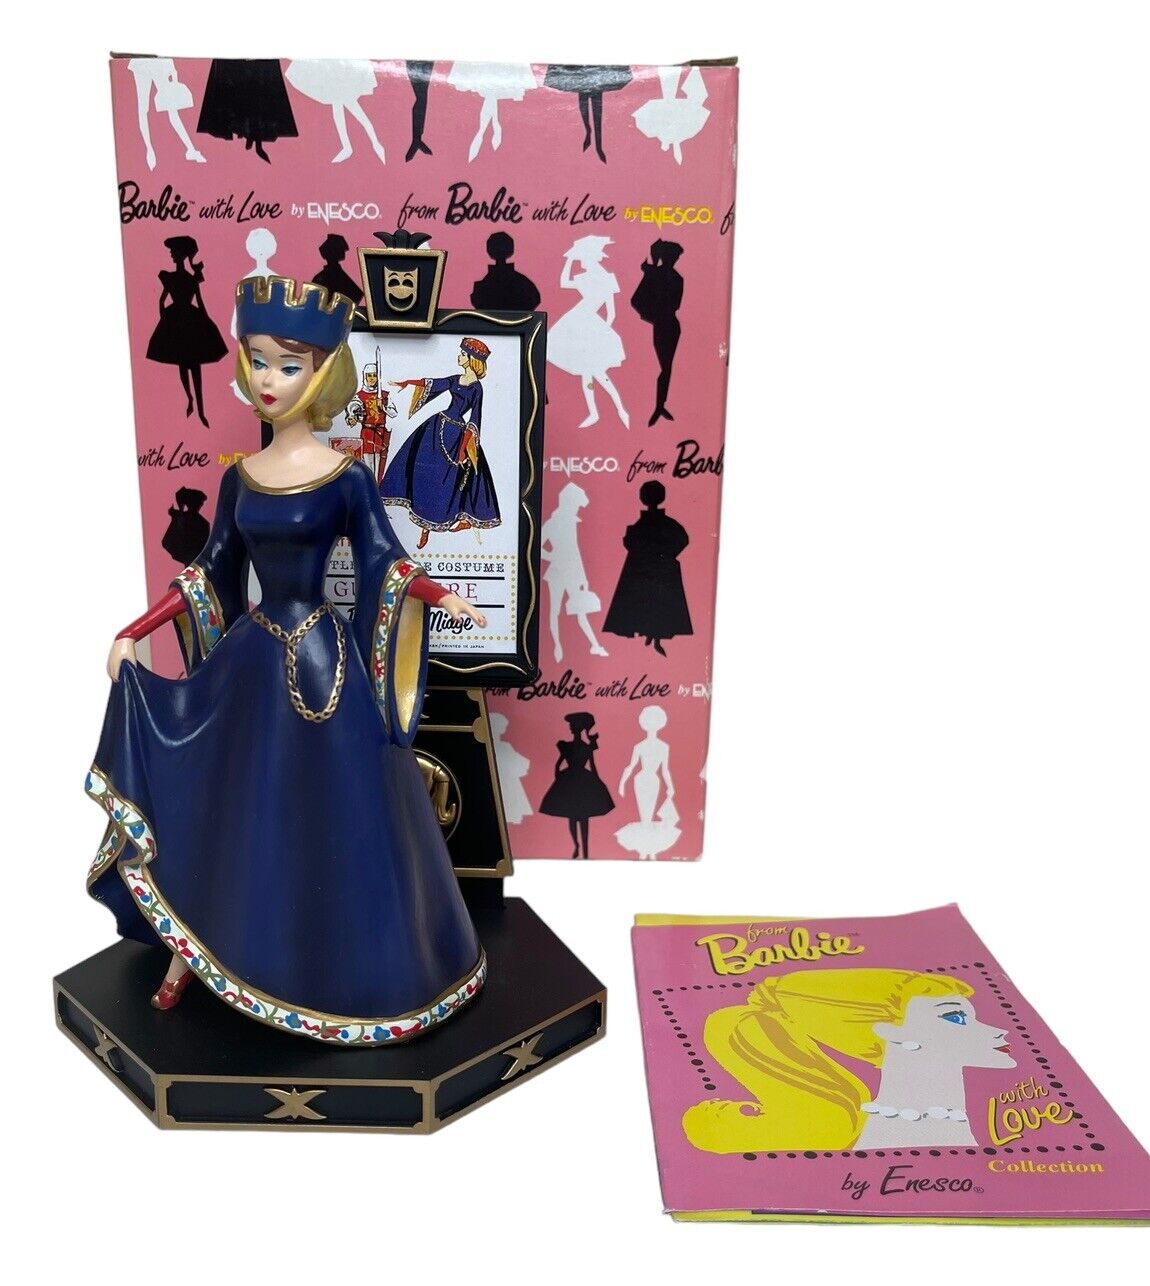 1996 Enesco From Barbie With Love Guinevere A Royal Surprise Figurine Display